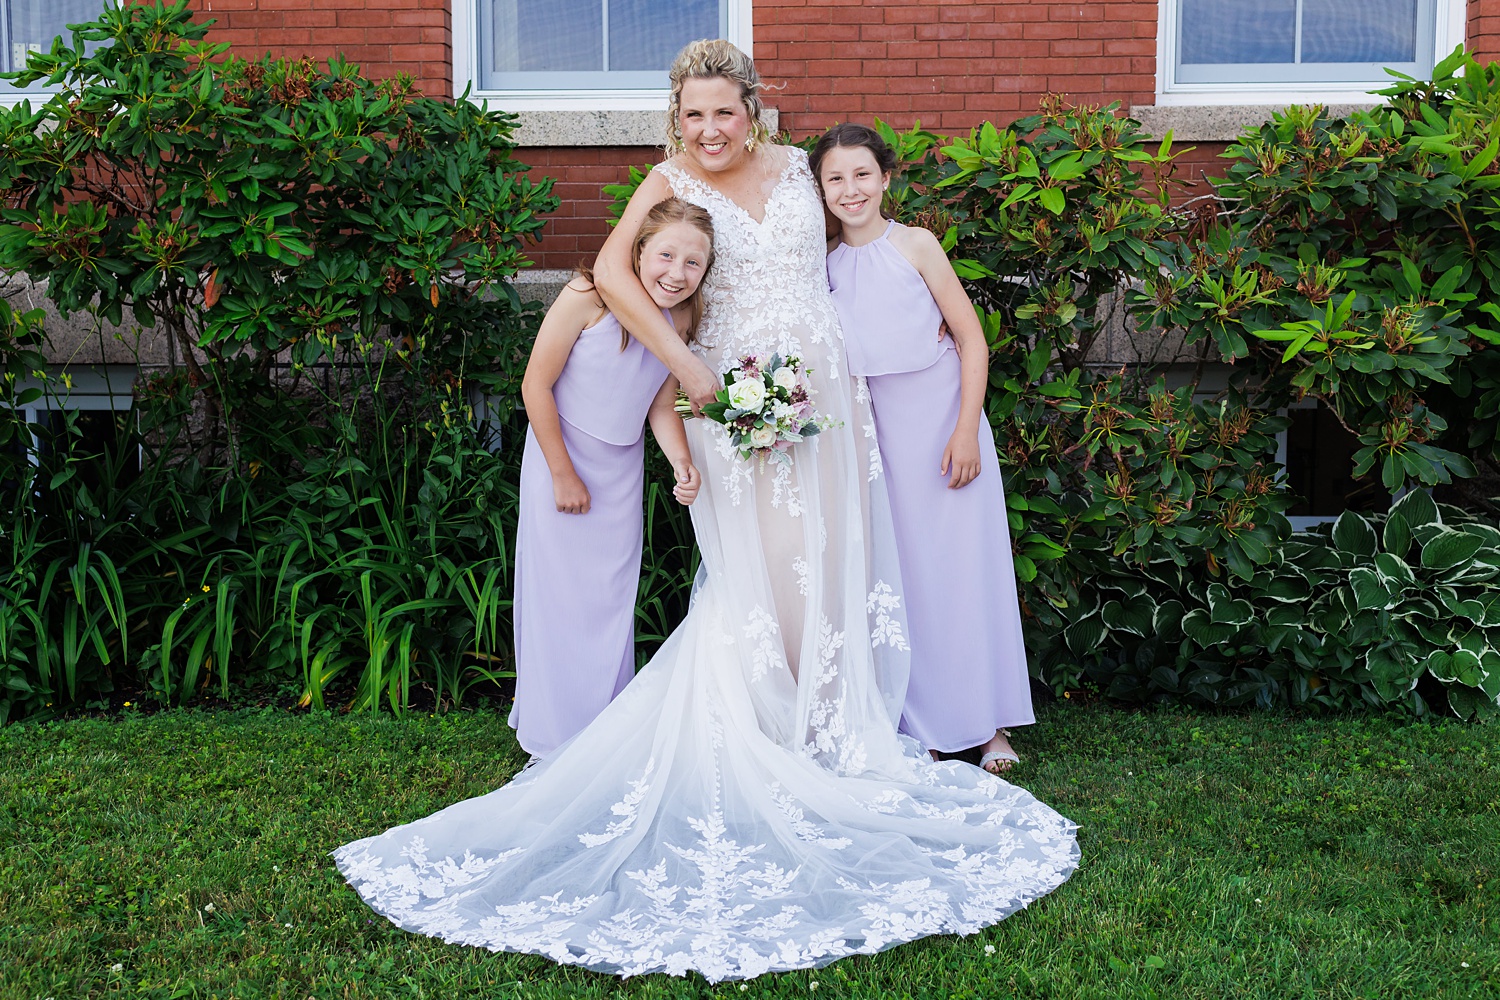 The bride and two of the youngest family members on the wedding day enjoy a little fun